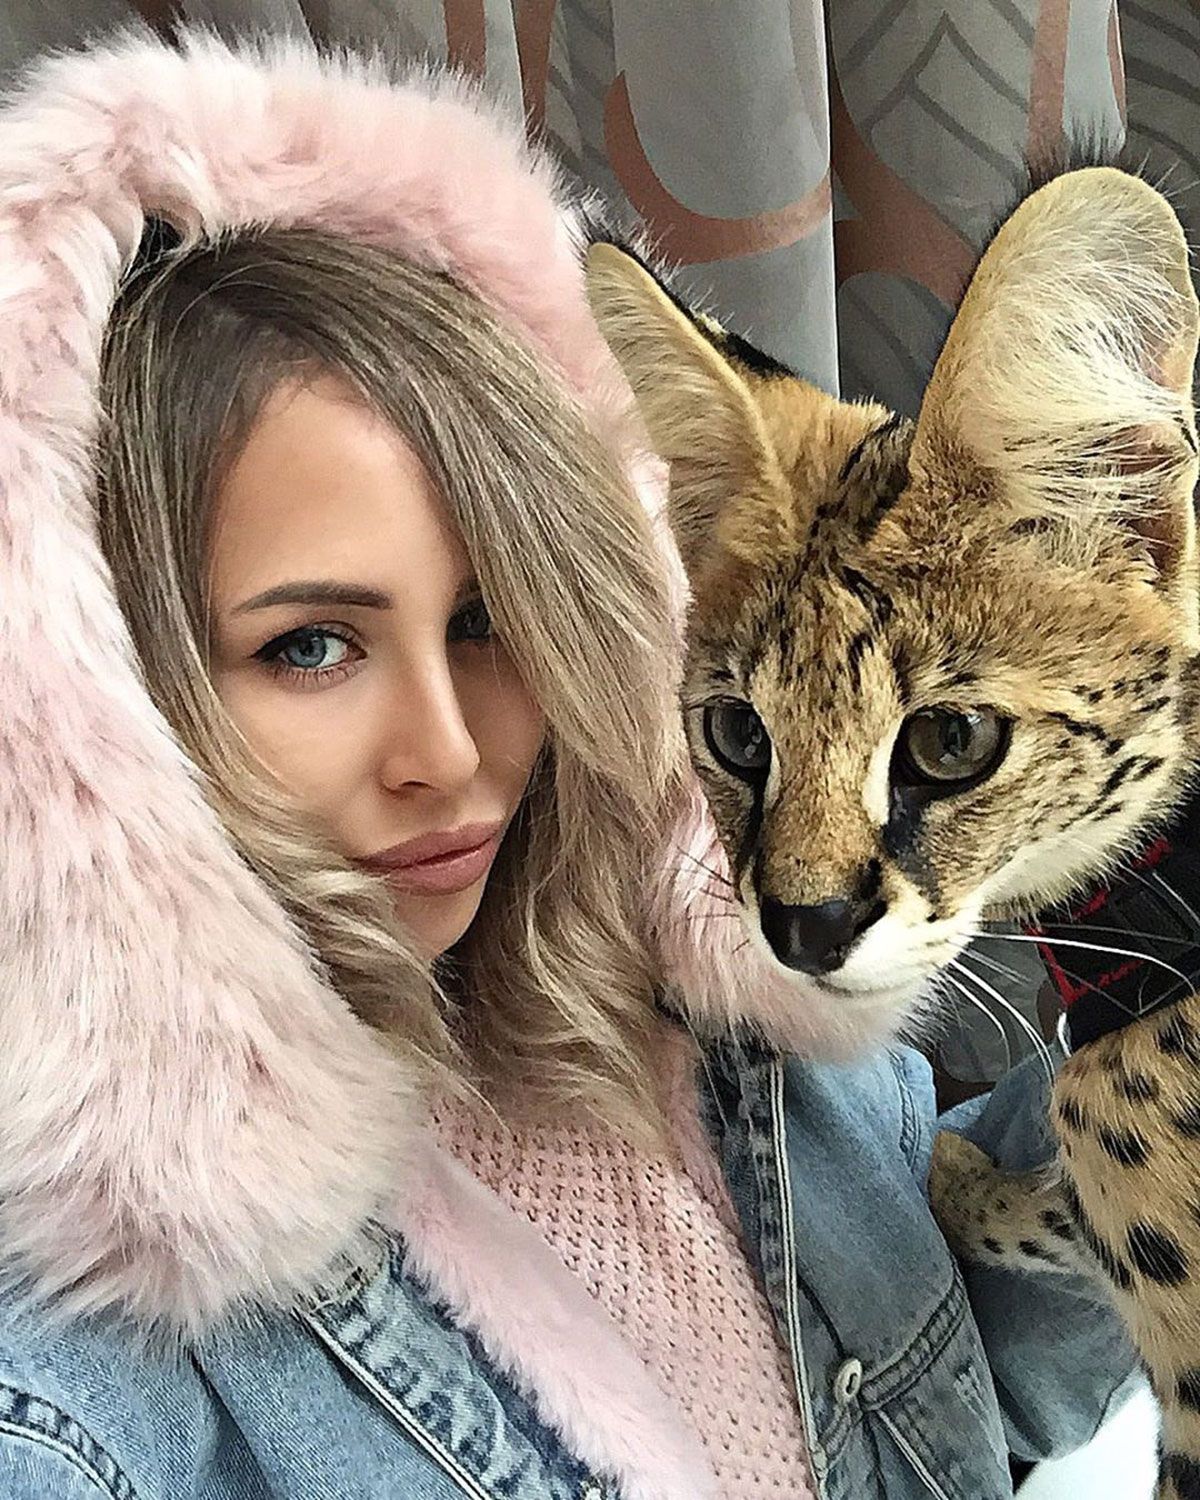 I Want To Be A Russian Instagram Girl With A Big Cat,How To Bleach Clothes